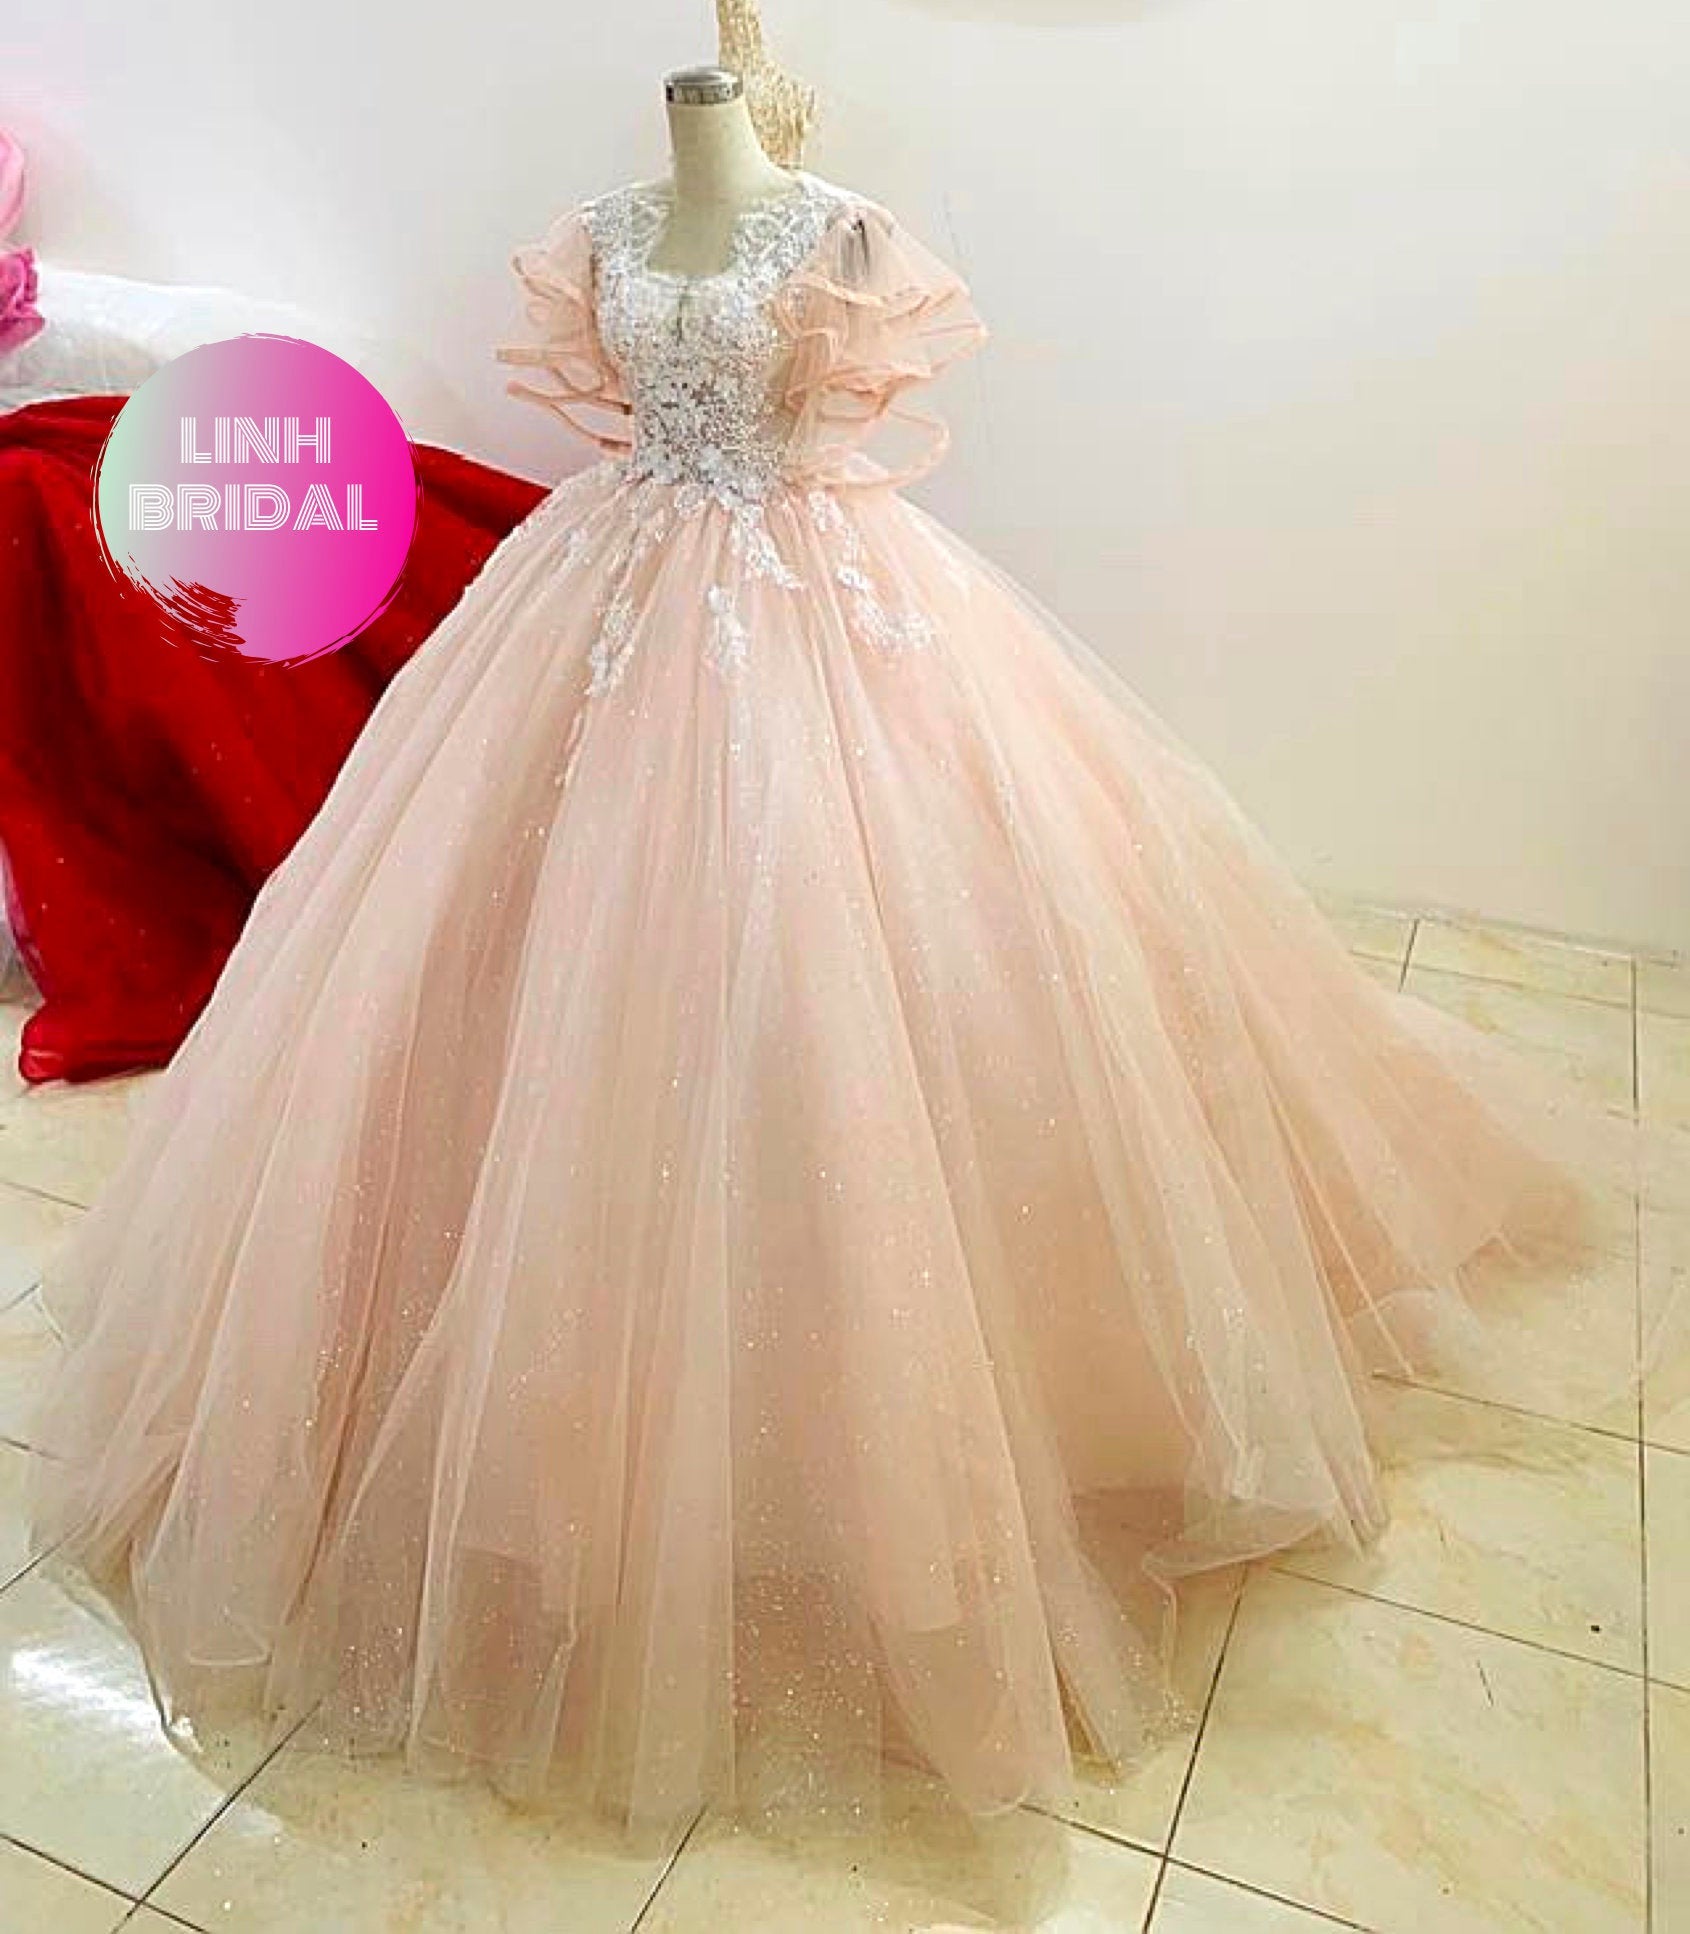 Pretty Light Pink Or White Lace Ruffle Flutter Sleeve Ball Gown Wedding Dress With Train